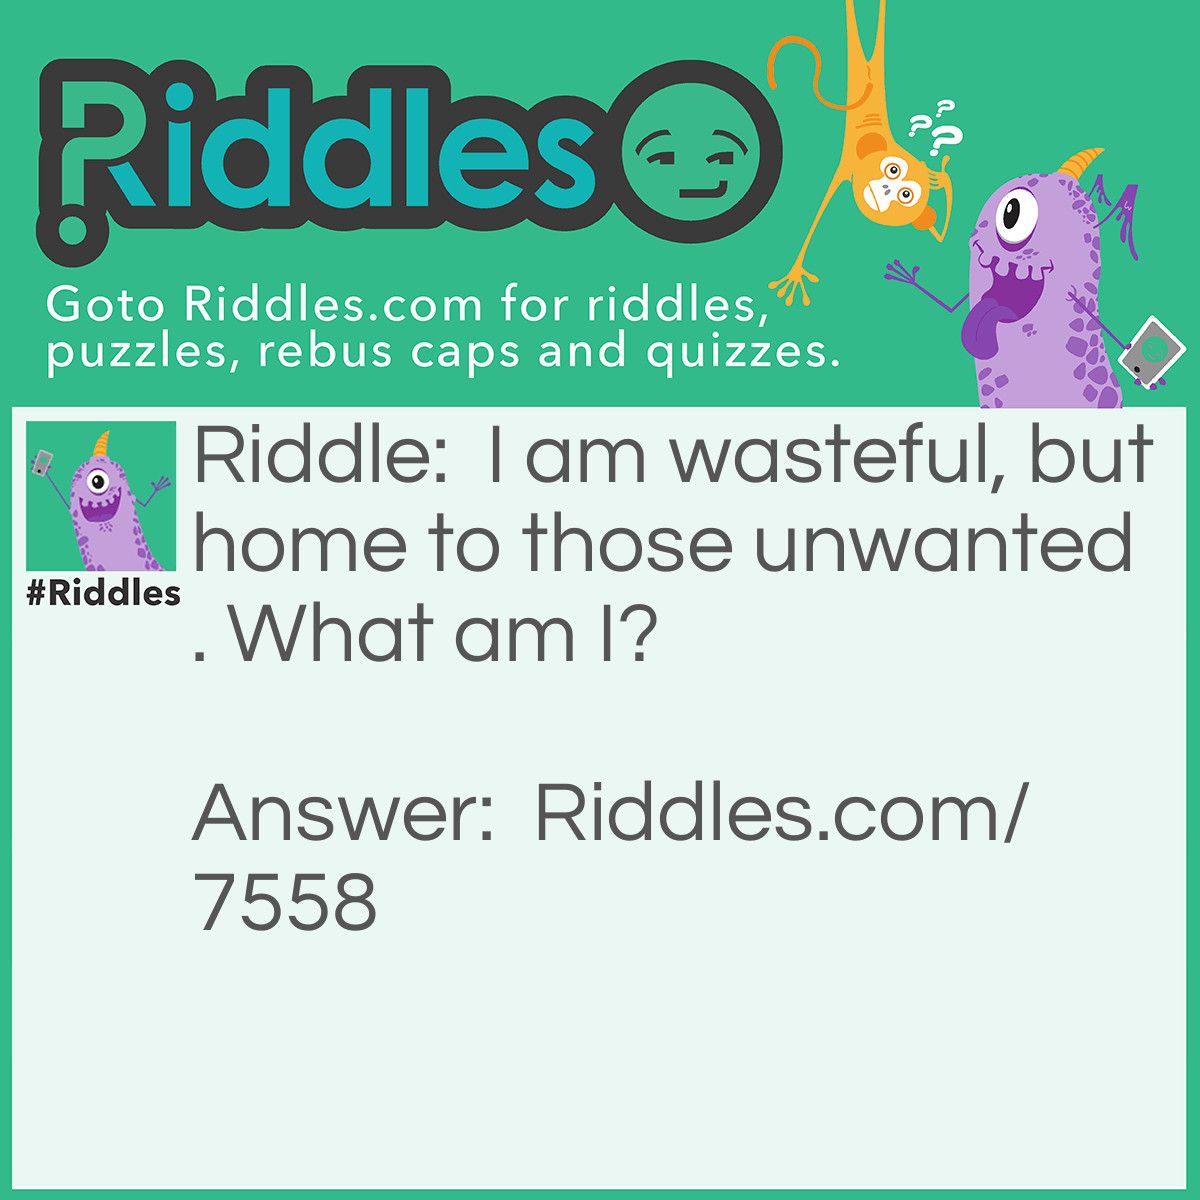 Riddle: I am wasteful, but home to those unwanted. What am I? Answer: A bin